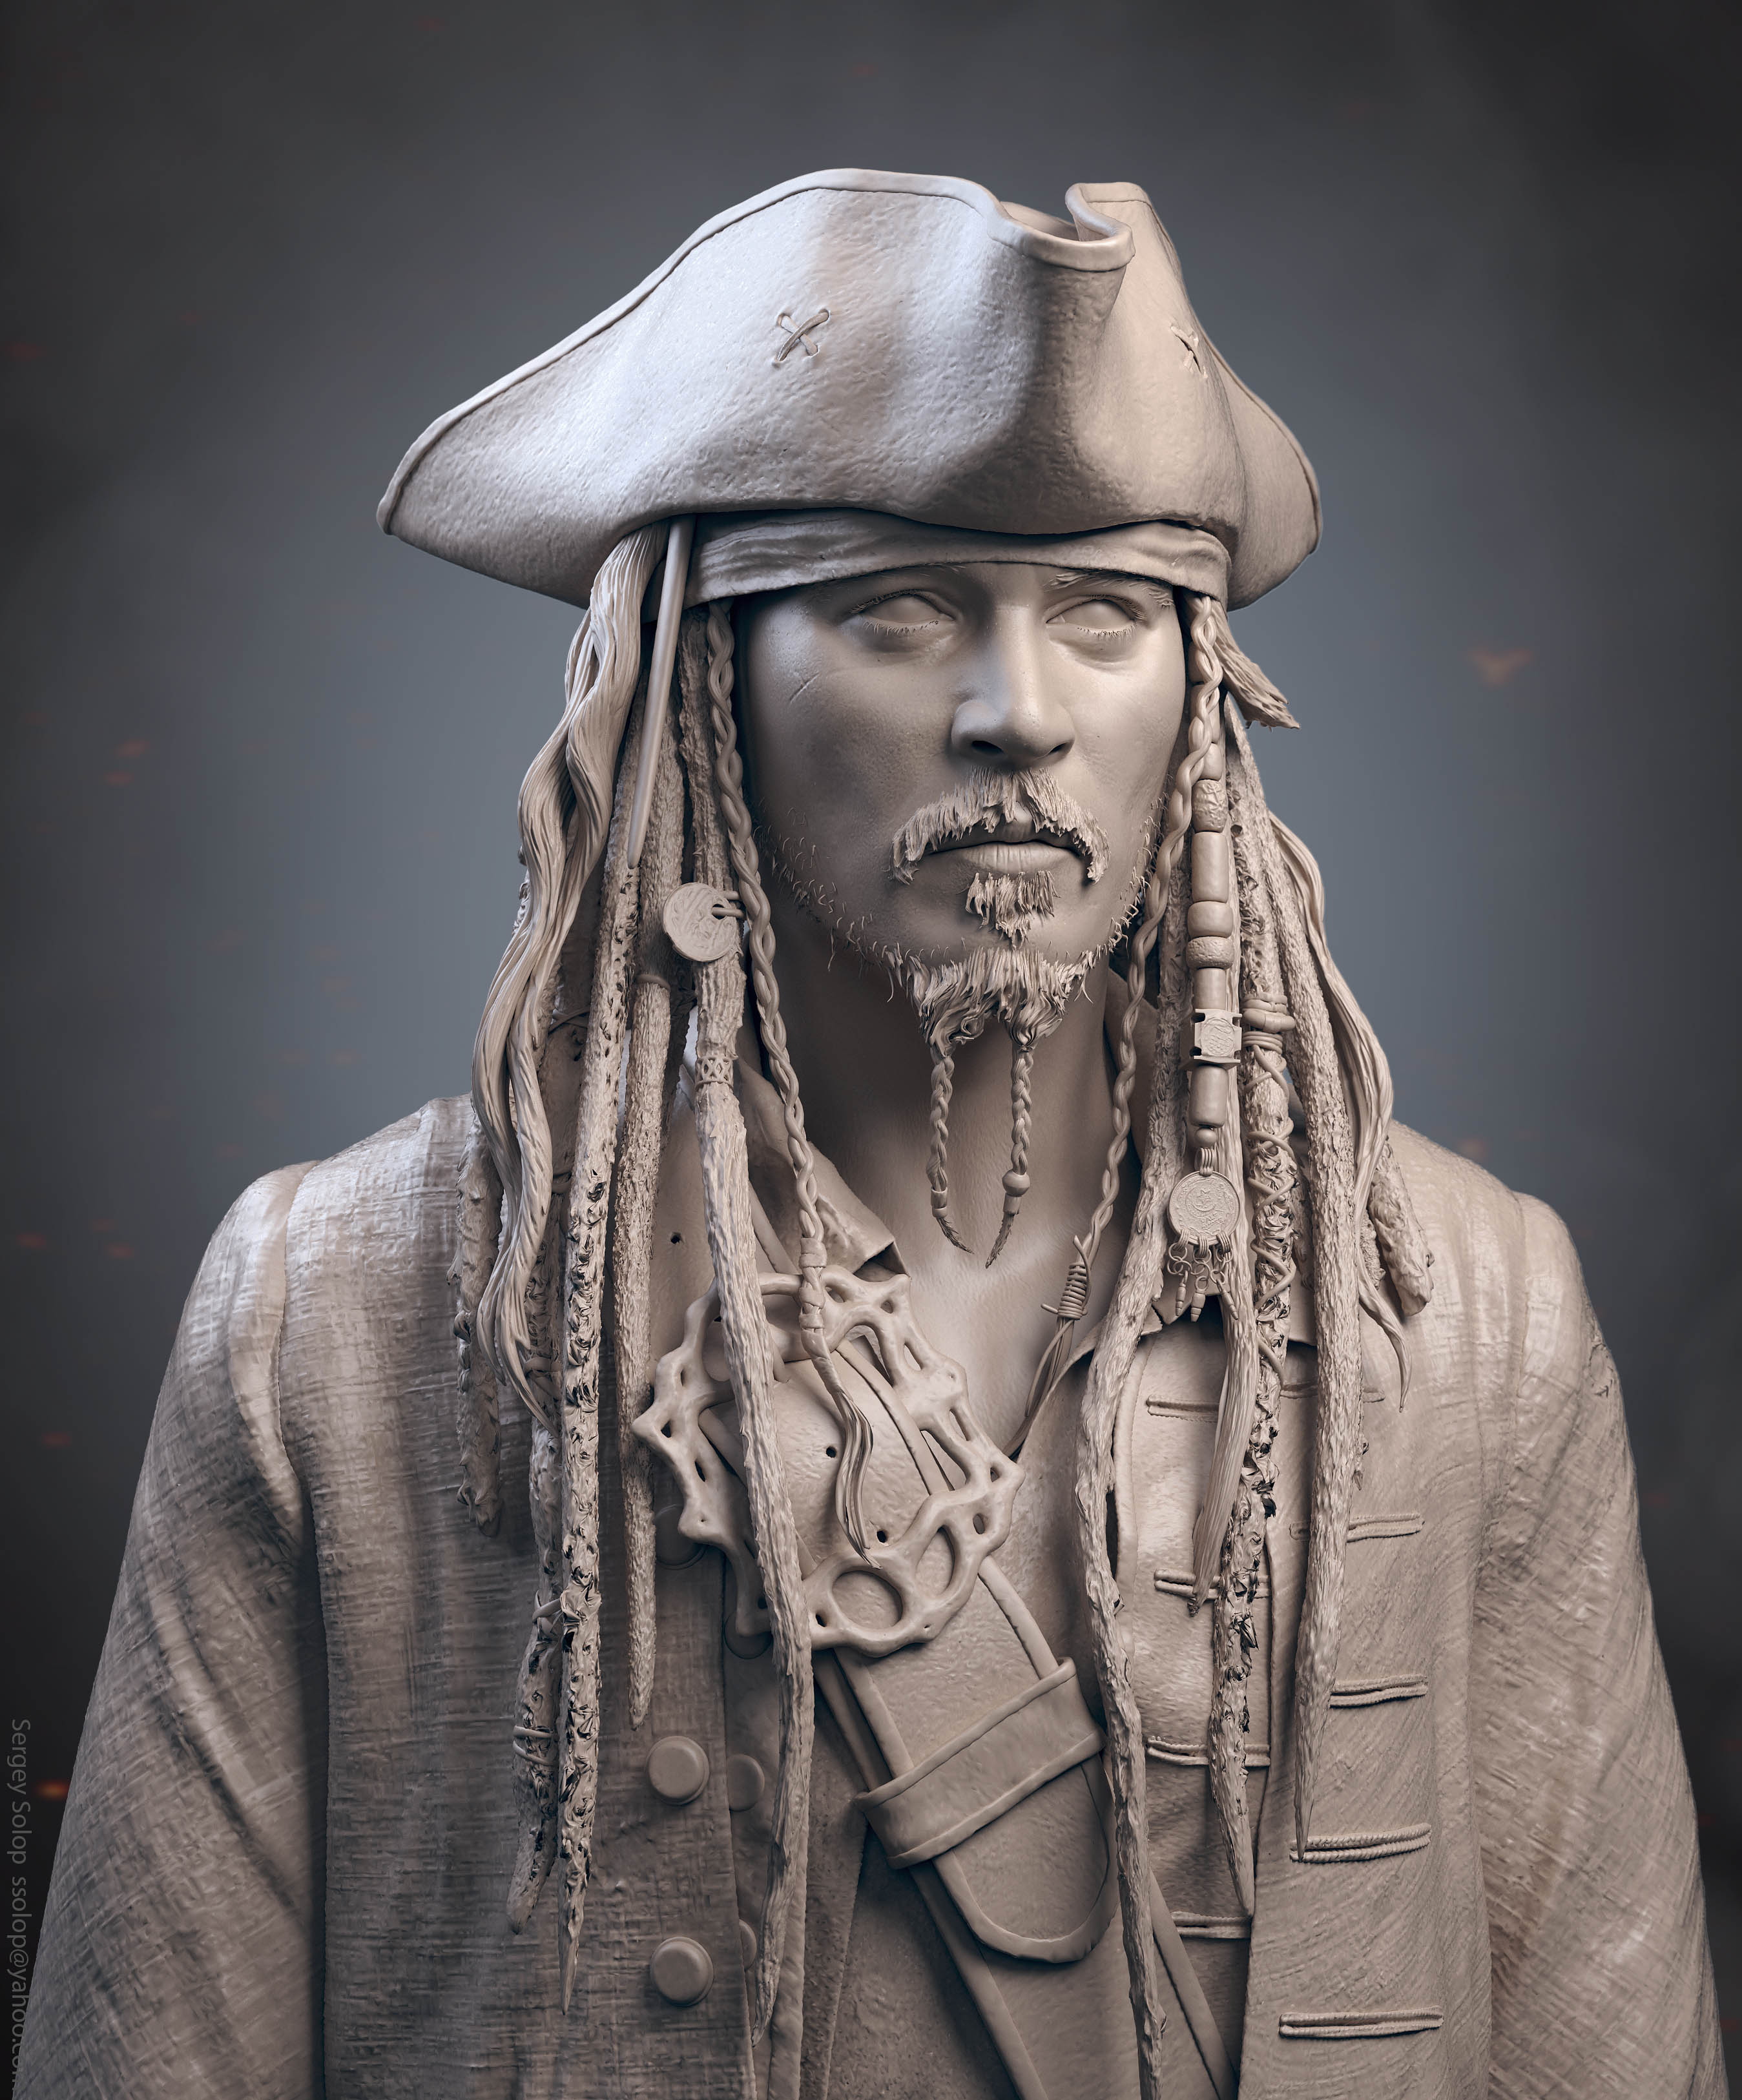 sergey-solop-jack-sparrow-pirates-of-the-caribbean-1342.jpg